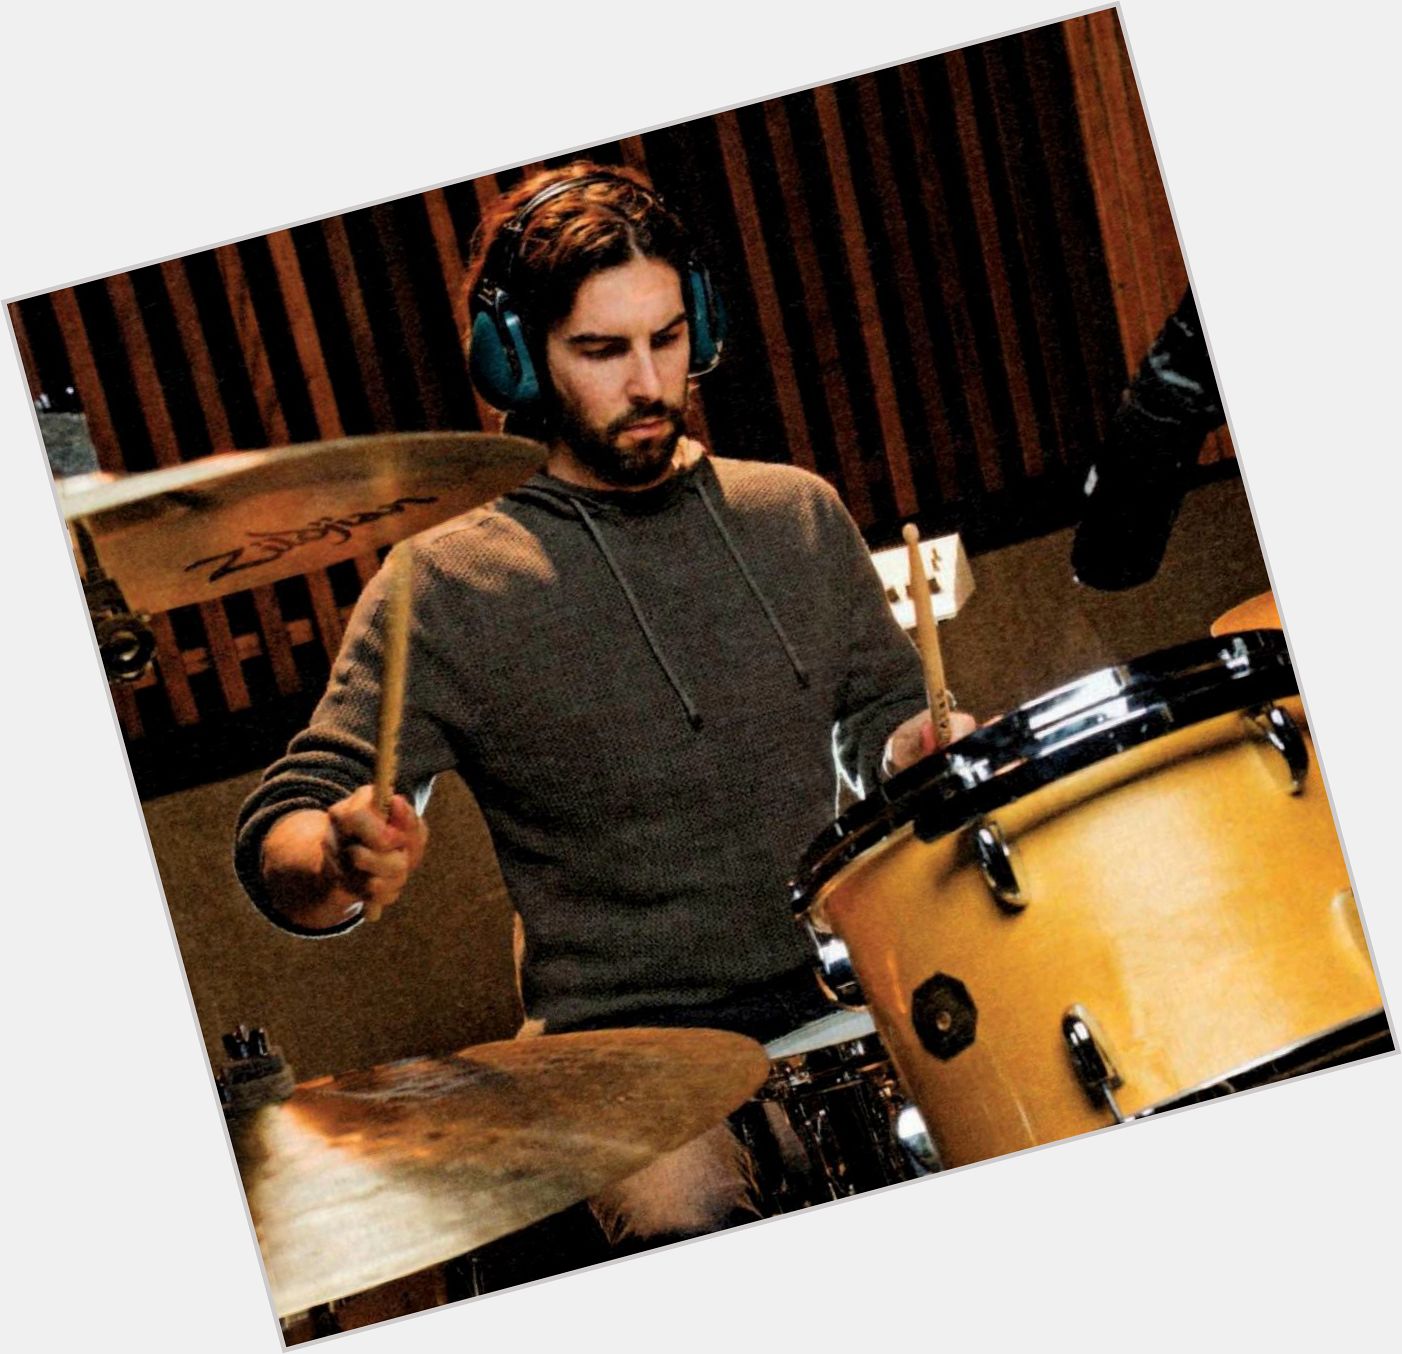 Please join me here at in wishing the one and only Rob Bourdon a very Happy 42nd Birthday today  